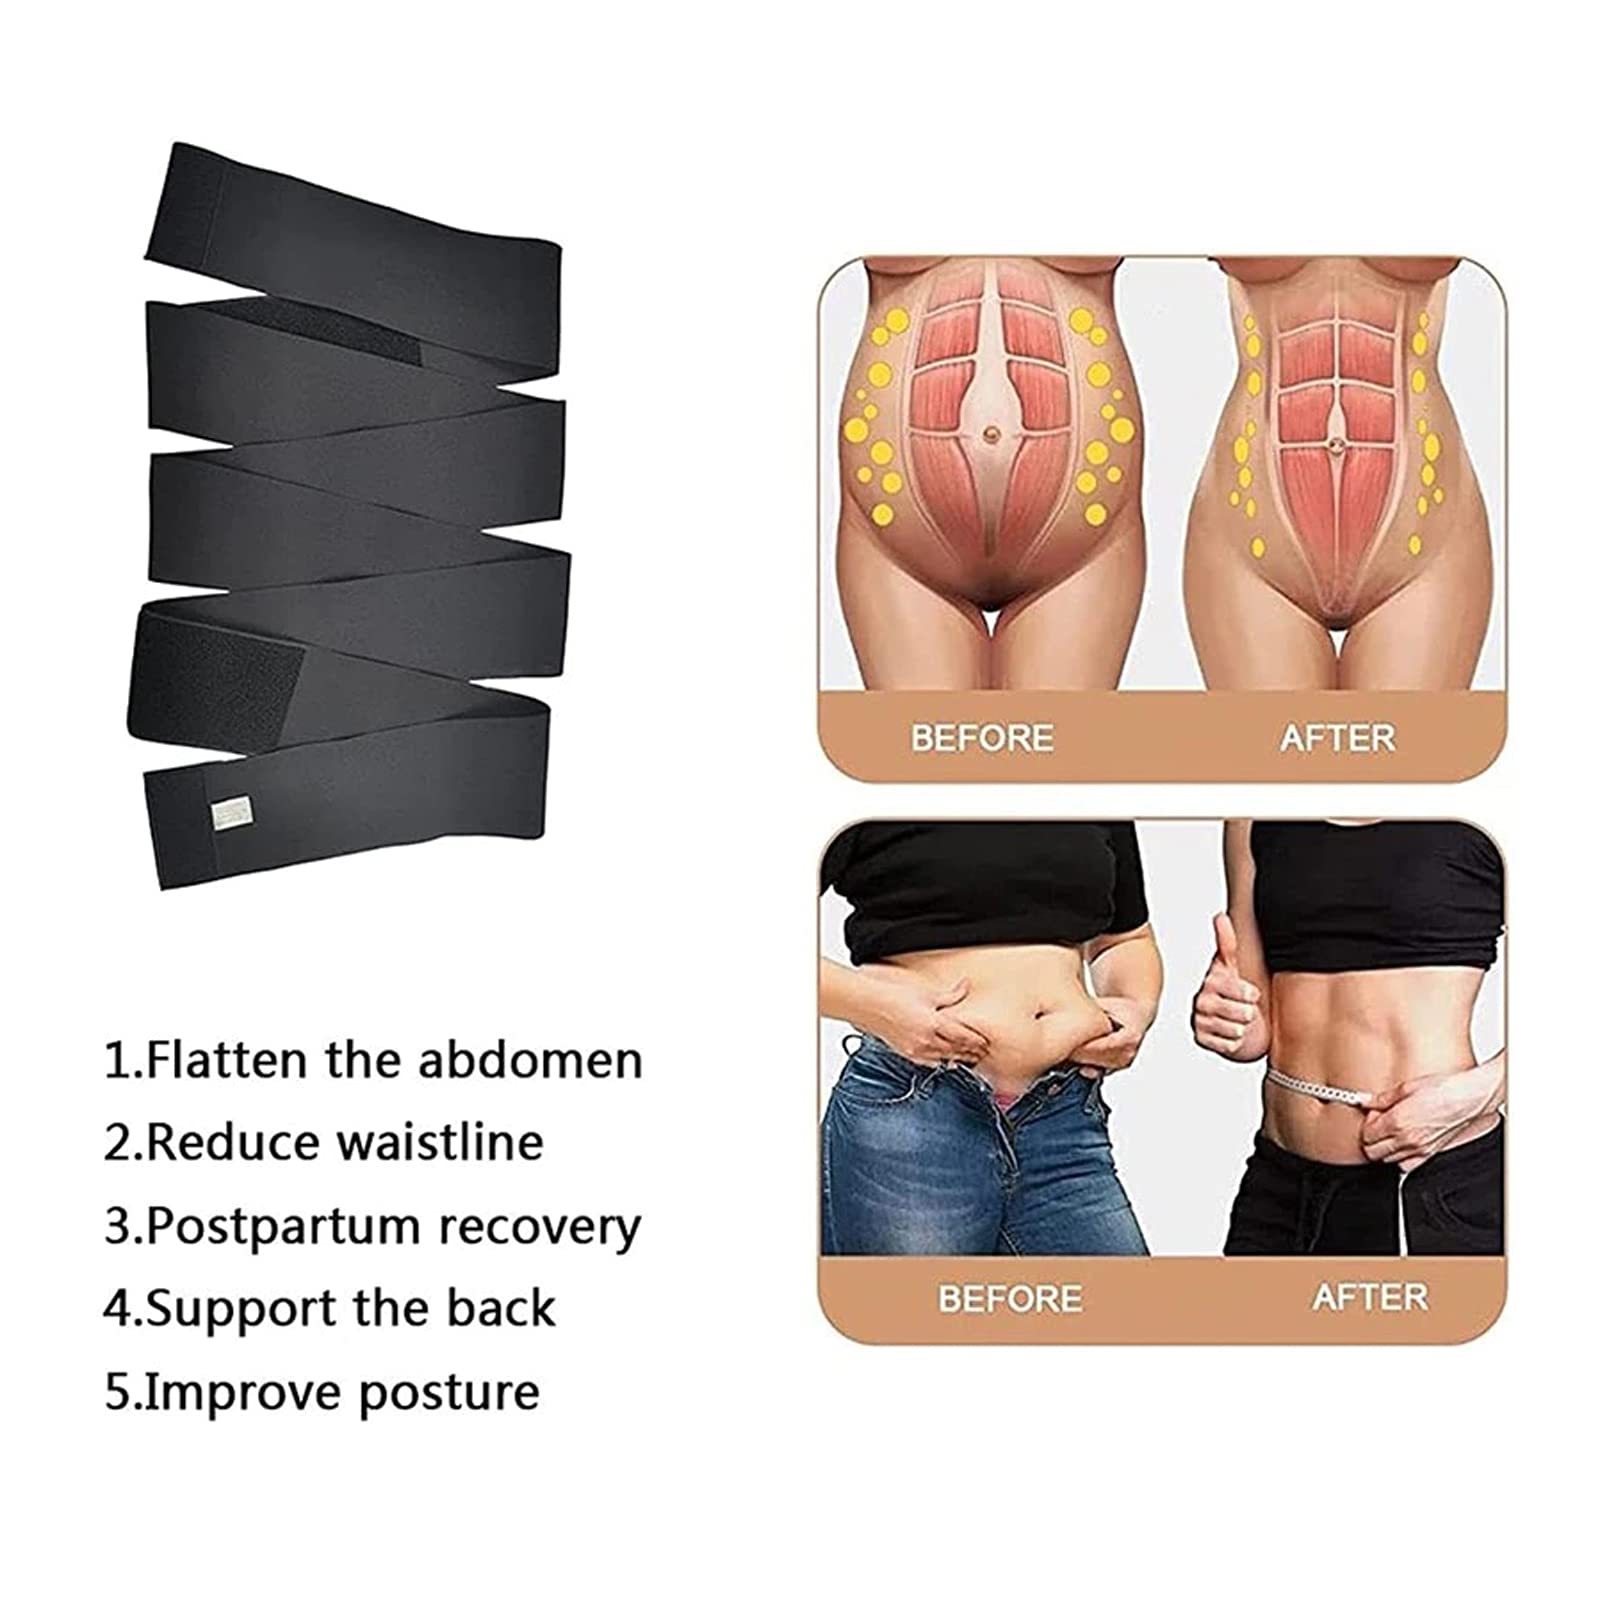 Invisible Women's Body Shaping Tummy Girdle Wrap Waist Lumbar Support